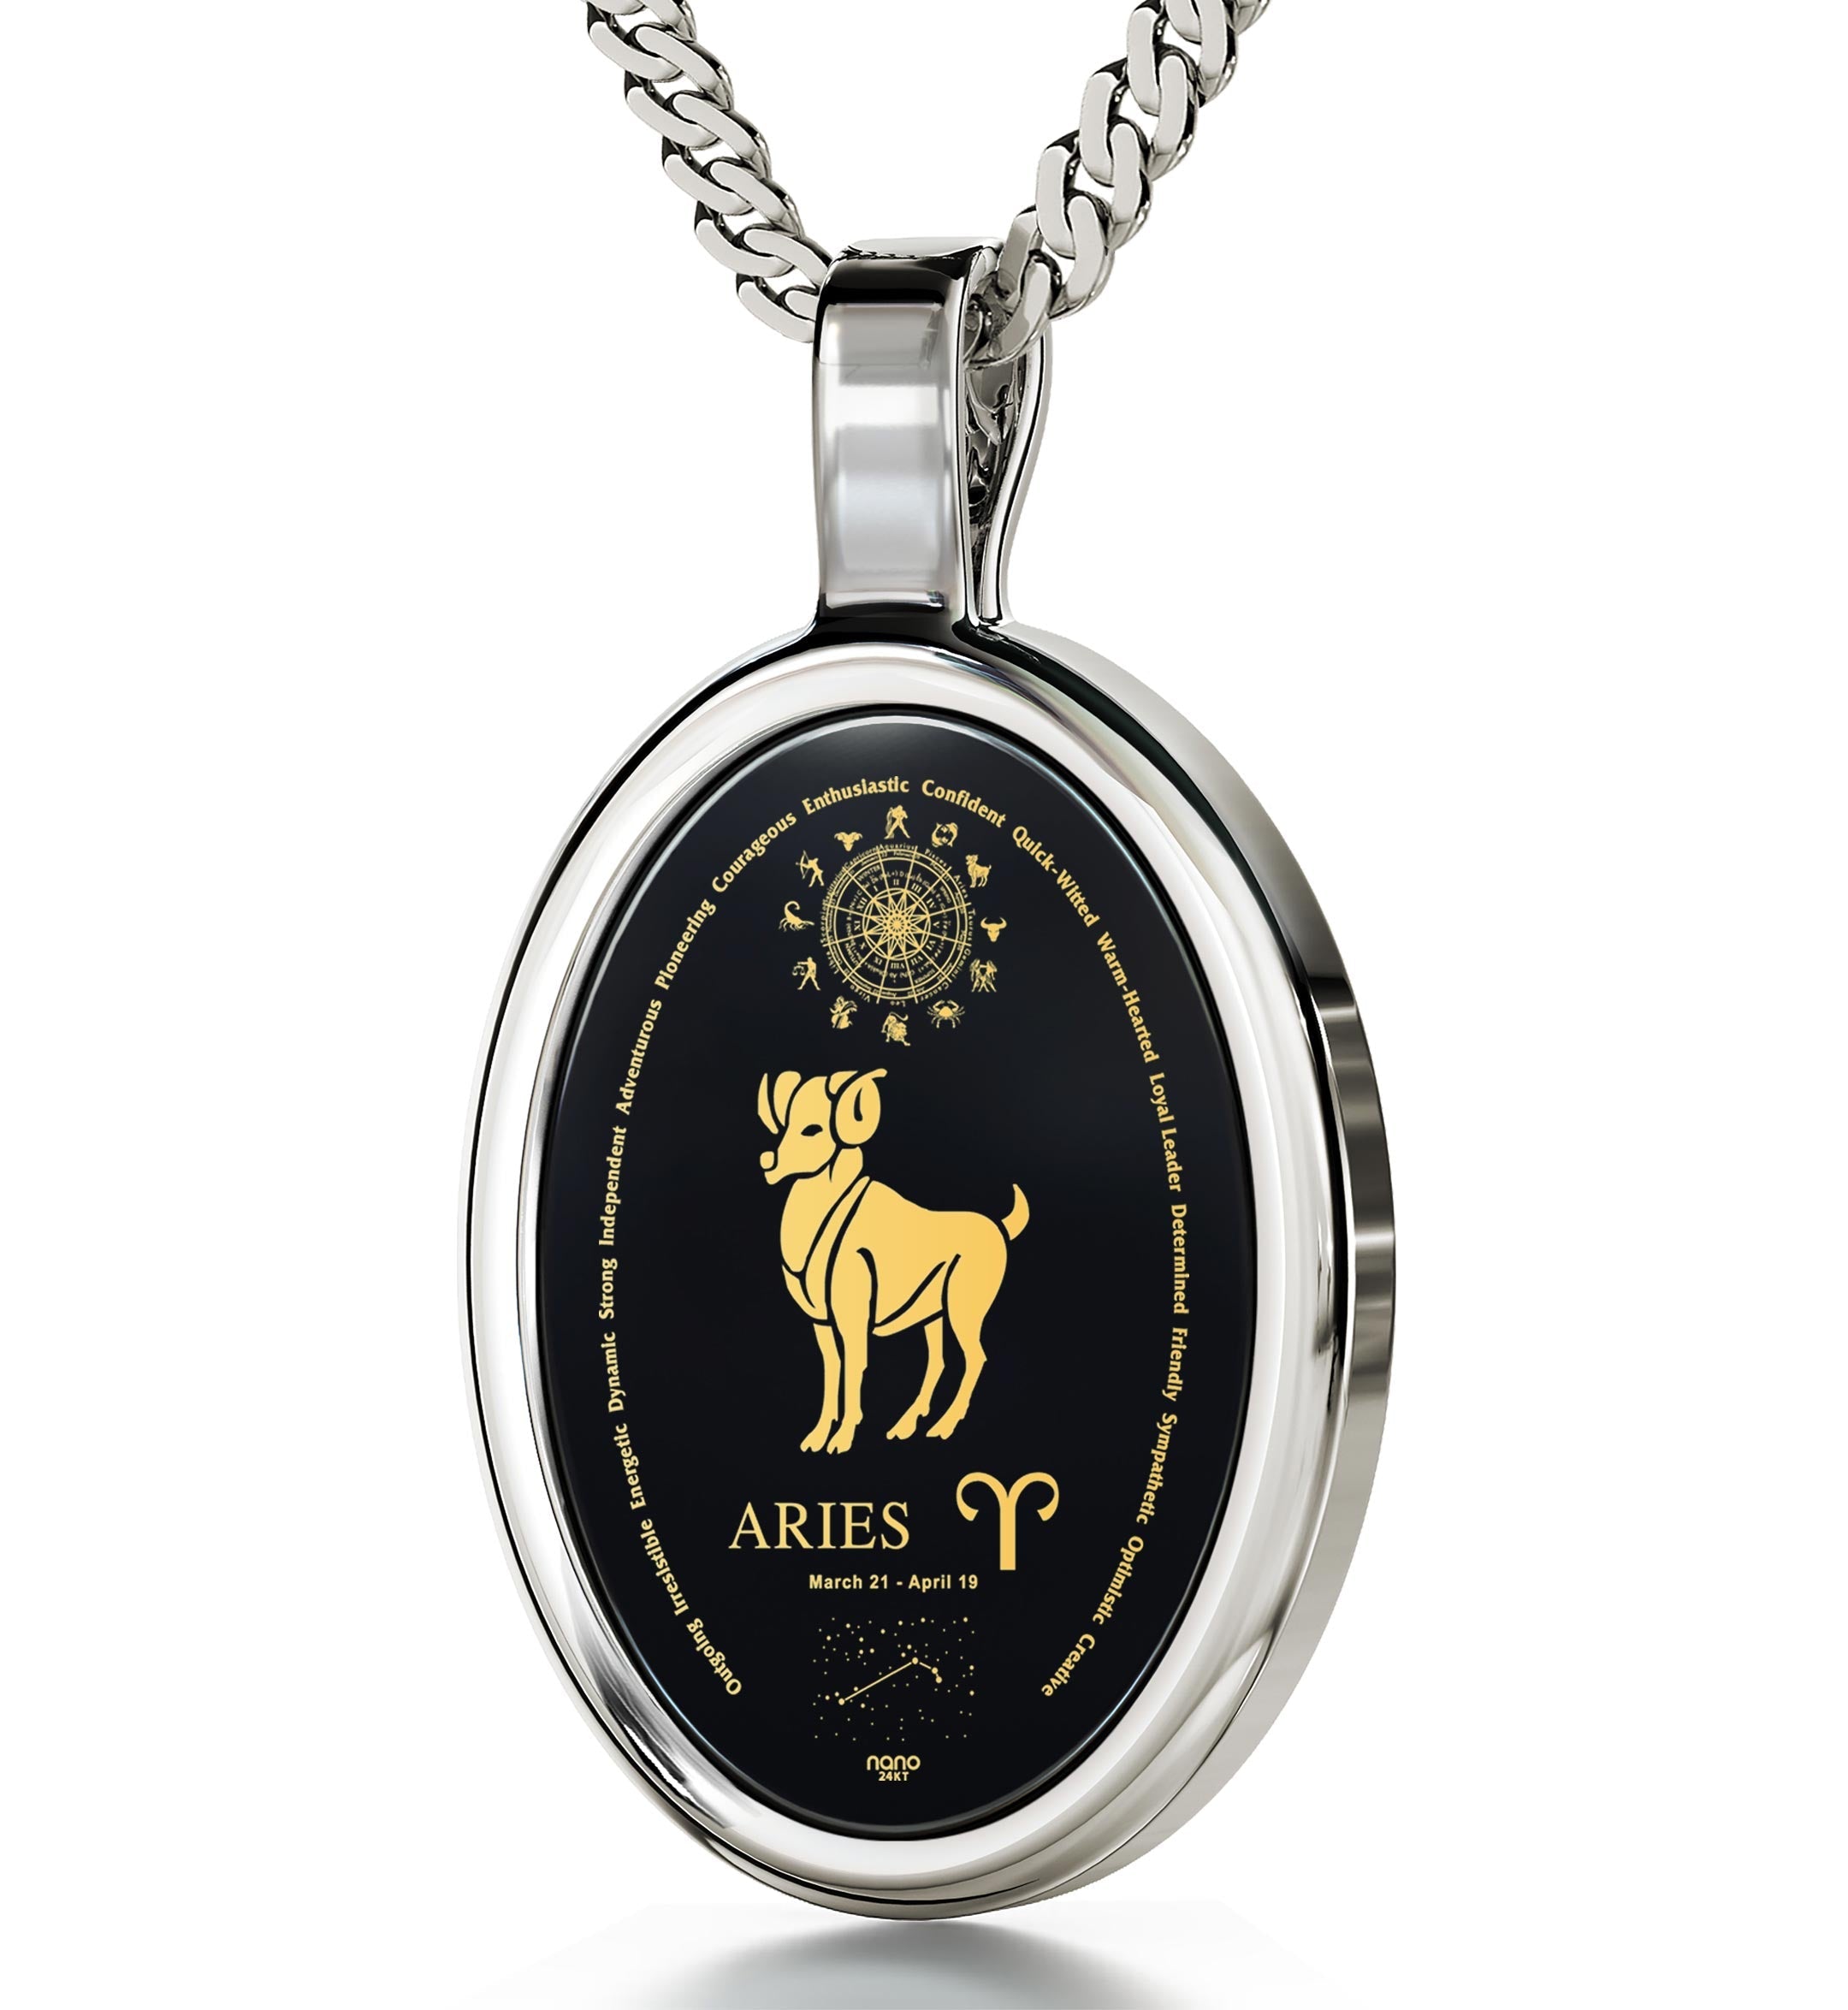 Round decorative pendant featuring the Aries Necklace Zodiac Pendant 24k Gold Inscribed on Onyx Stone with a golden ram, astrological symbol, and traits on a black onyx background surrounded by a silver frame.